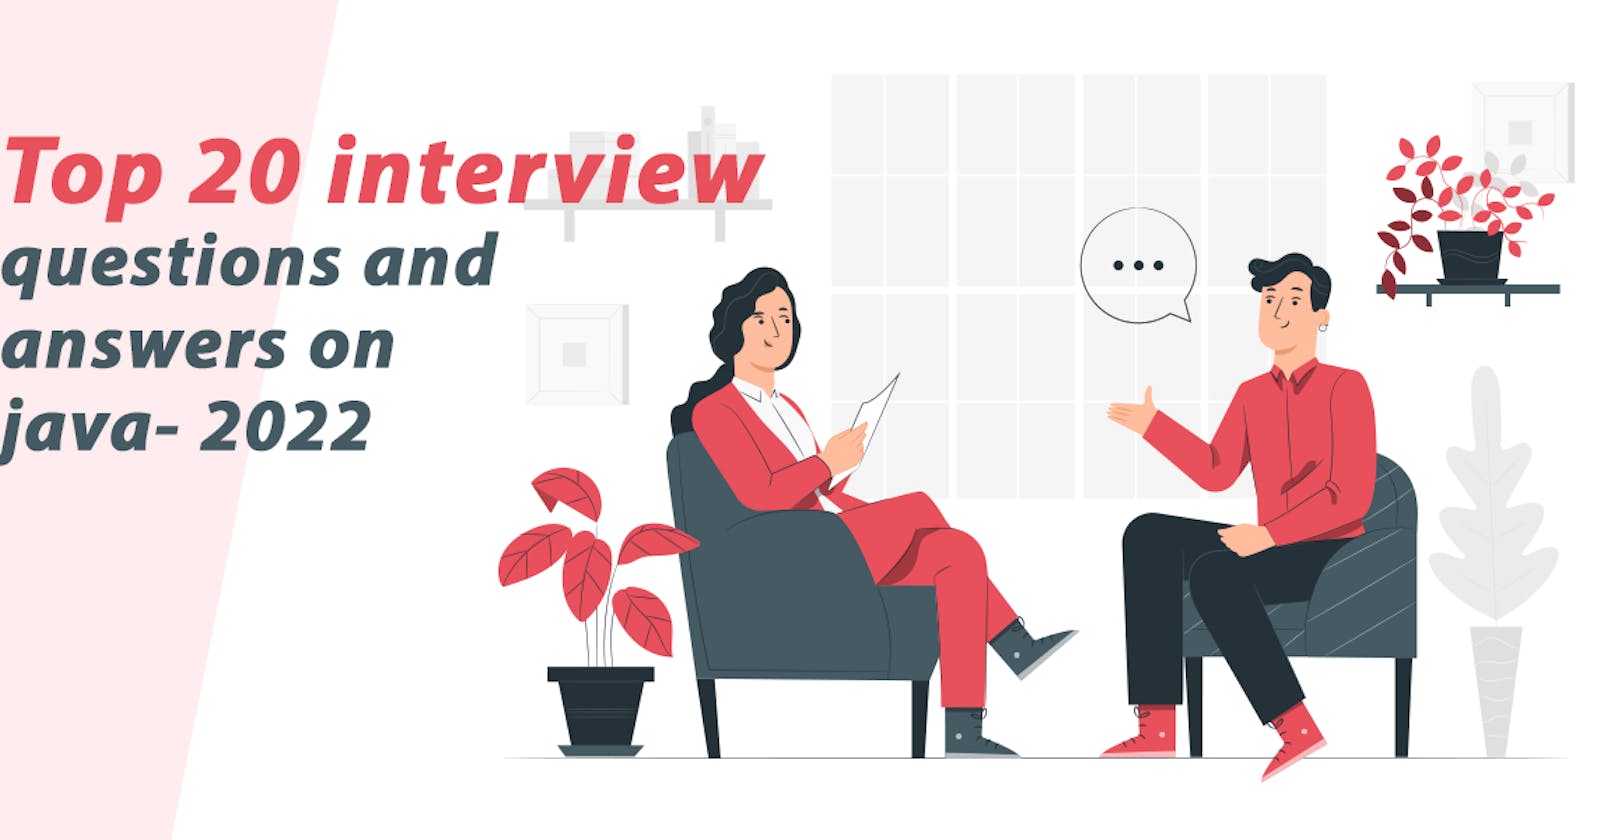 Practicing These Top 20 Interview Questions and Answers on Java Will Guarantee Your First Job